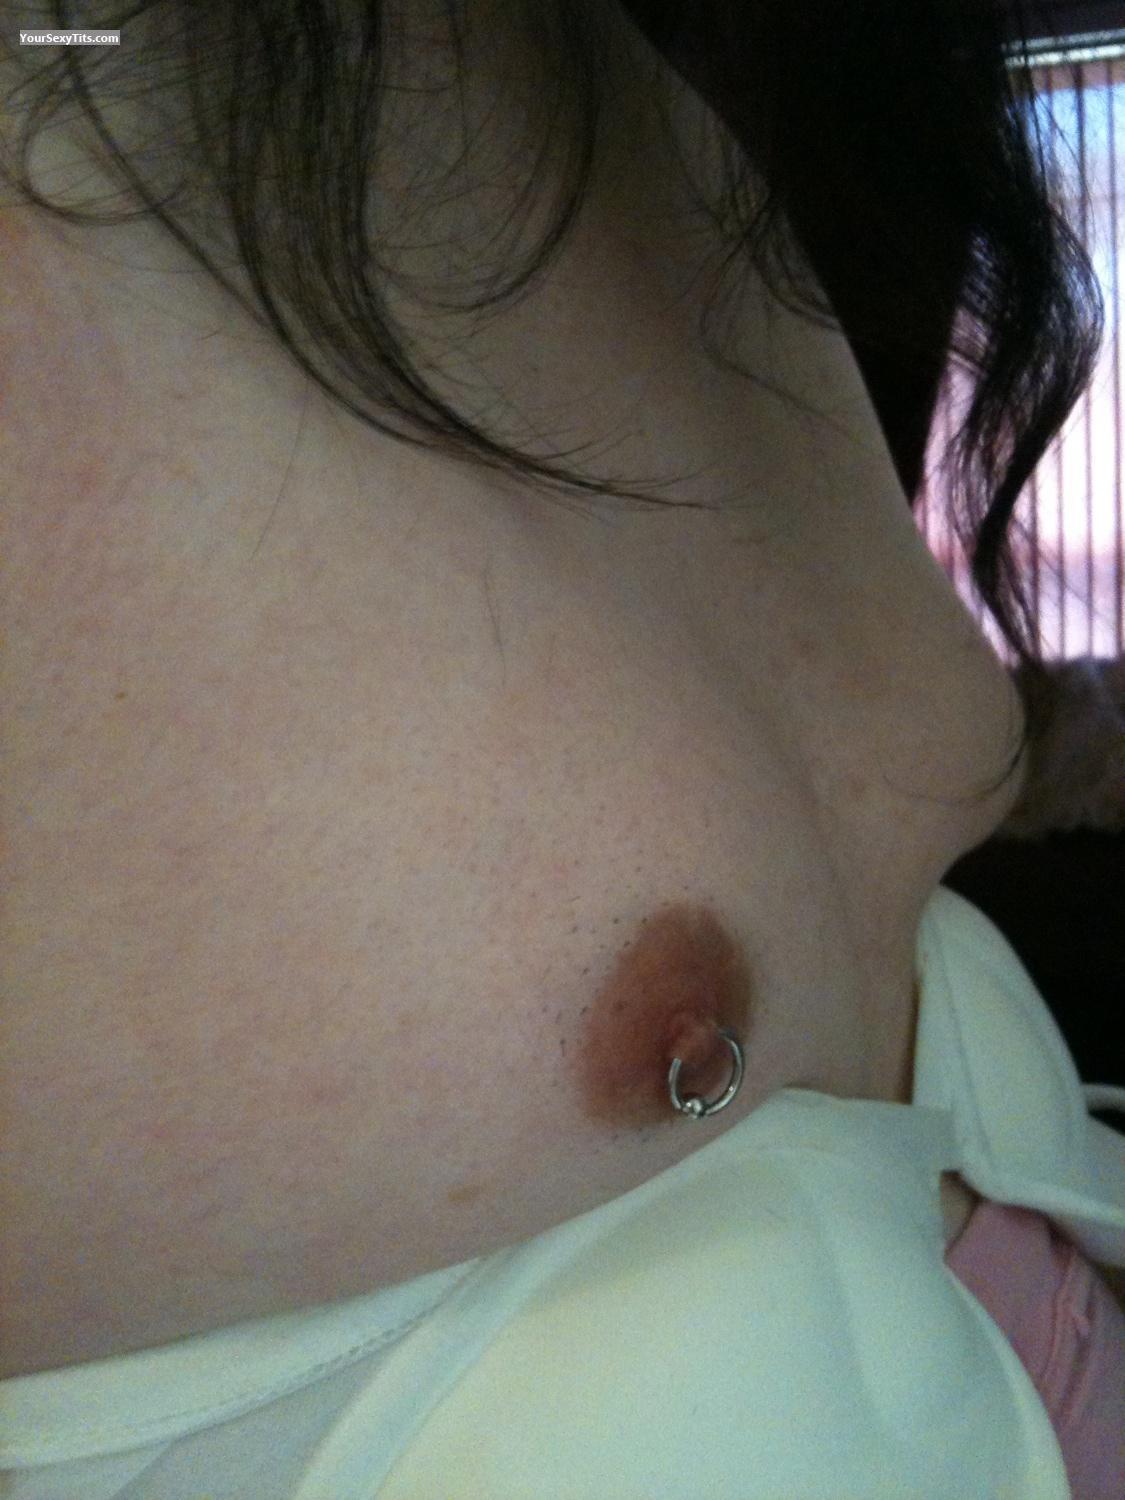 My Very small Tits Selfie by Cocks4me